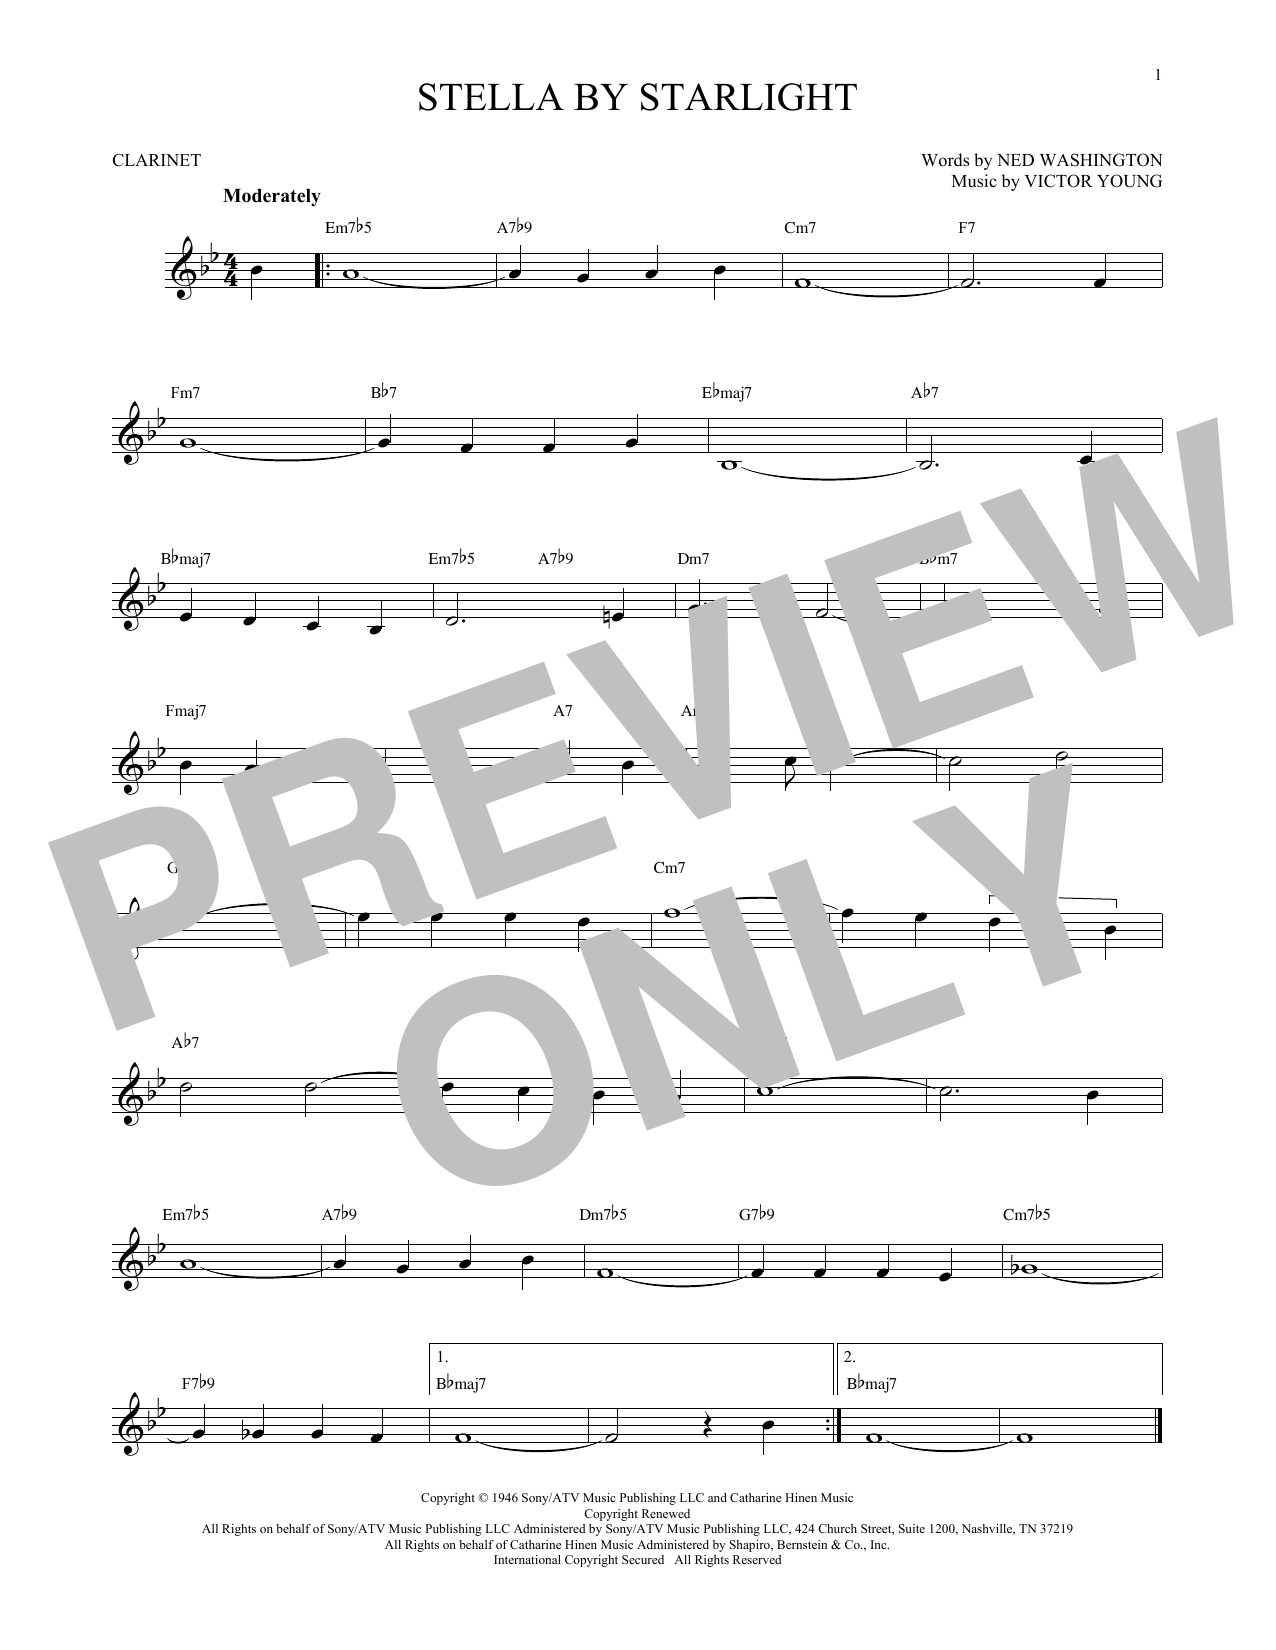 Download Victor Young Stella By Starlight Sheet Music